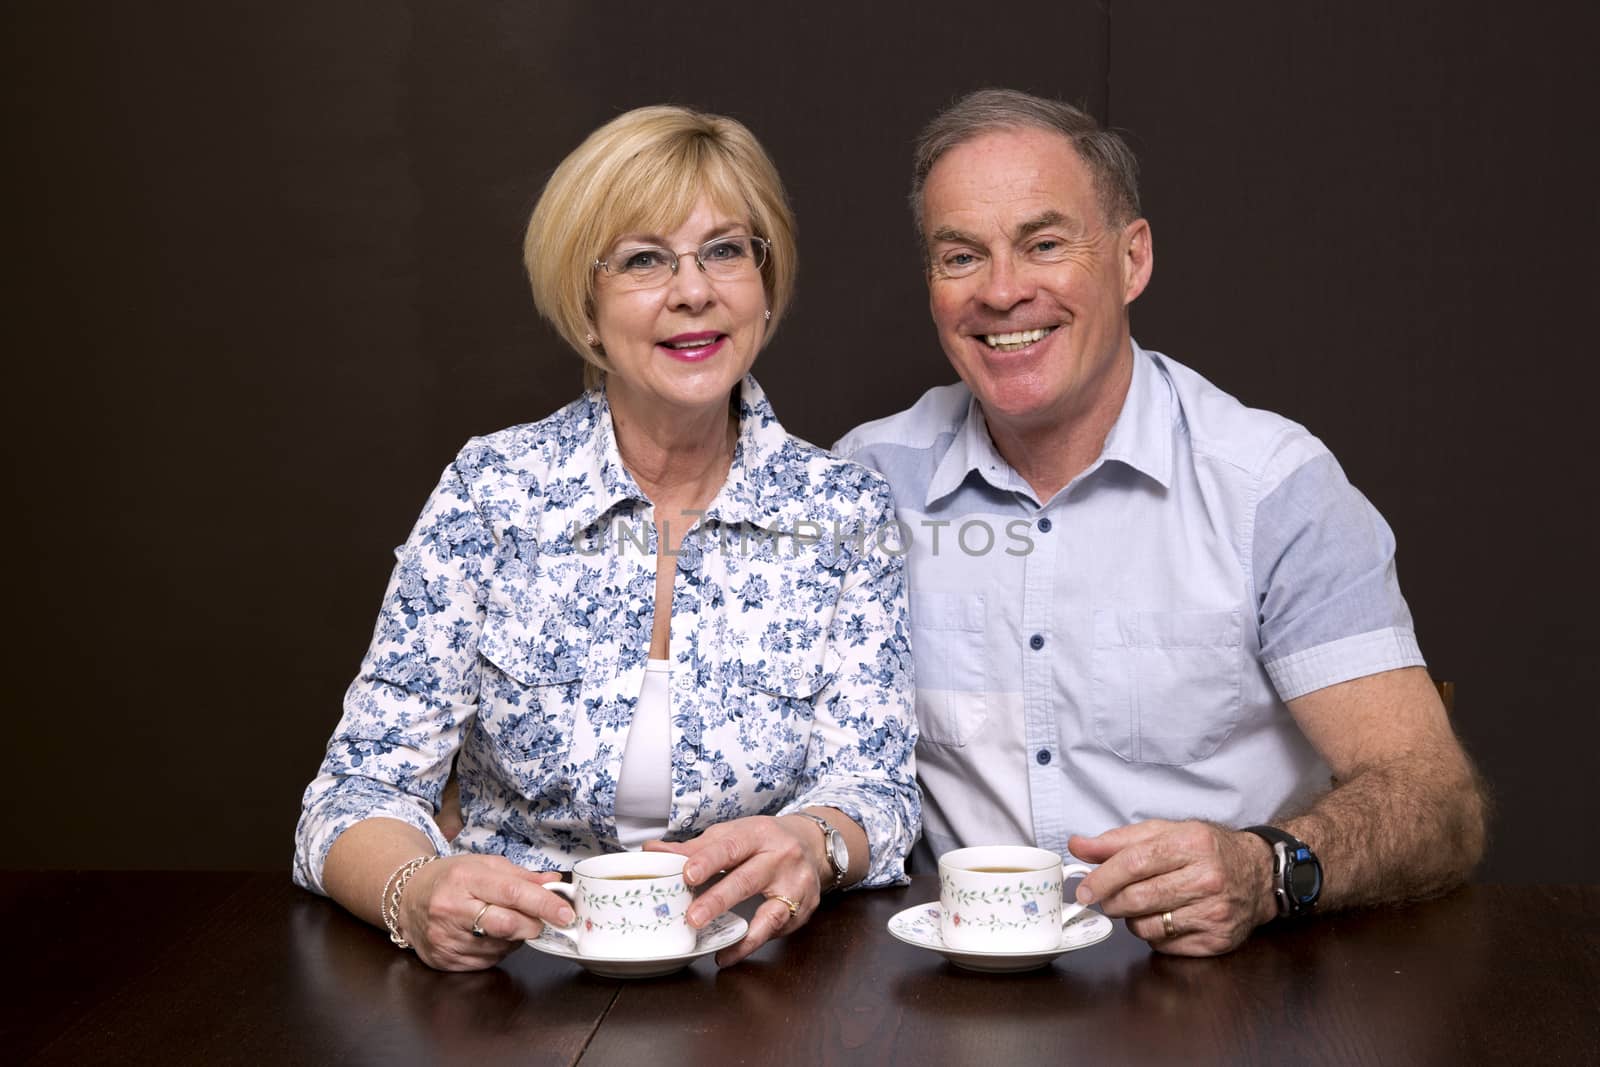 retired couple sitting by the table having coffee dark background